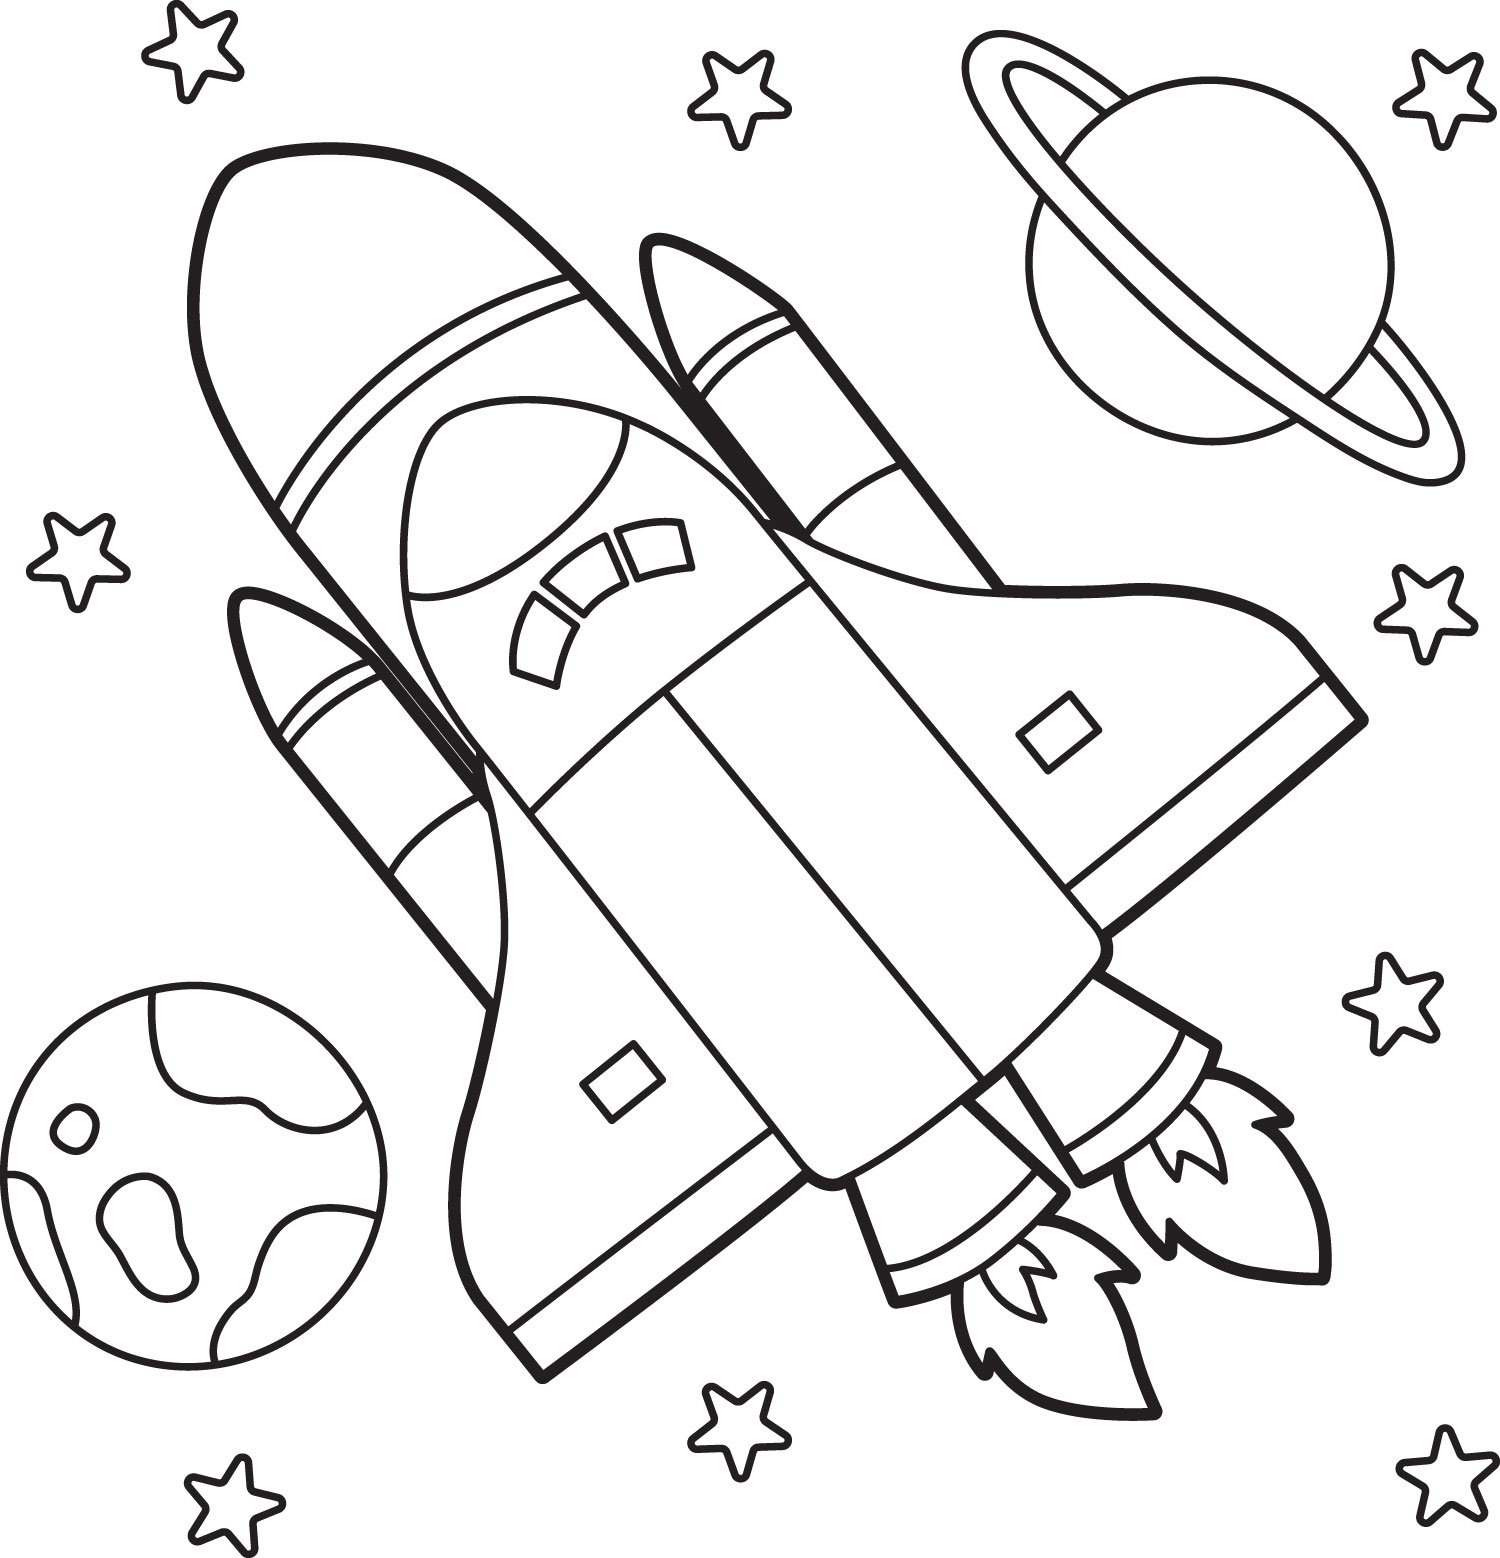 Coloring pages for kids â seattles favorite garden store since